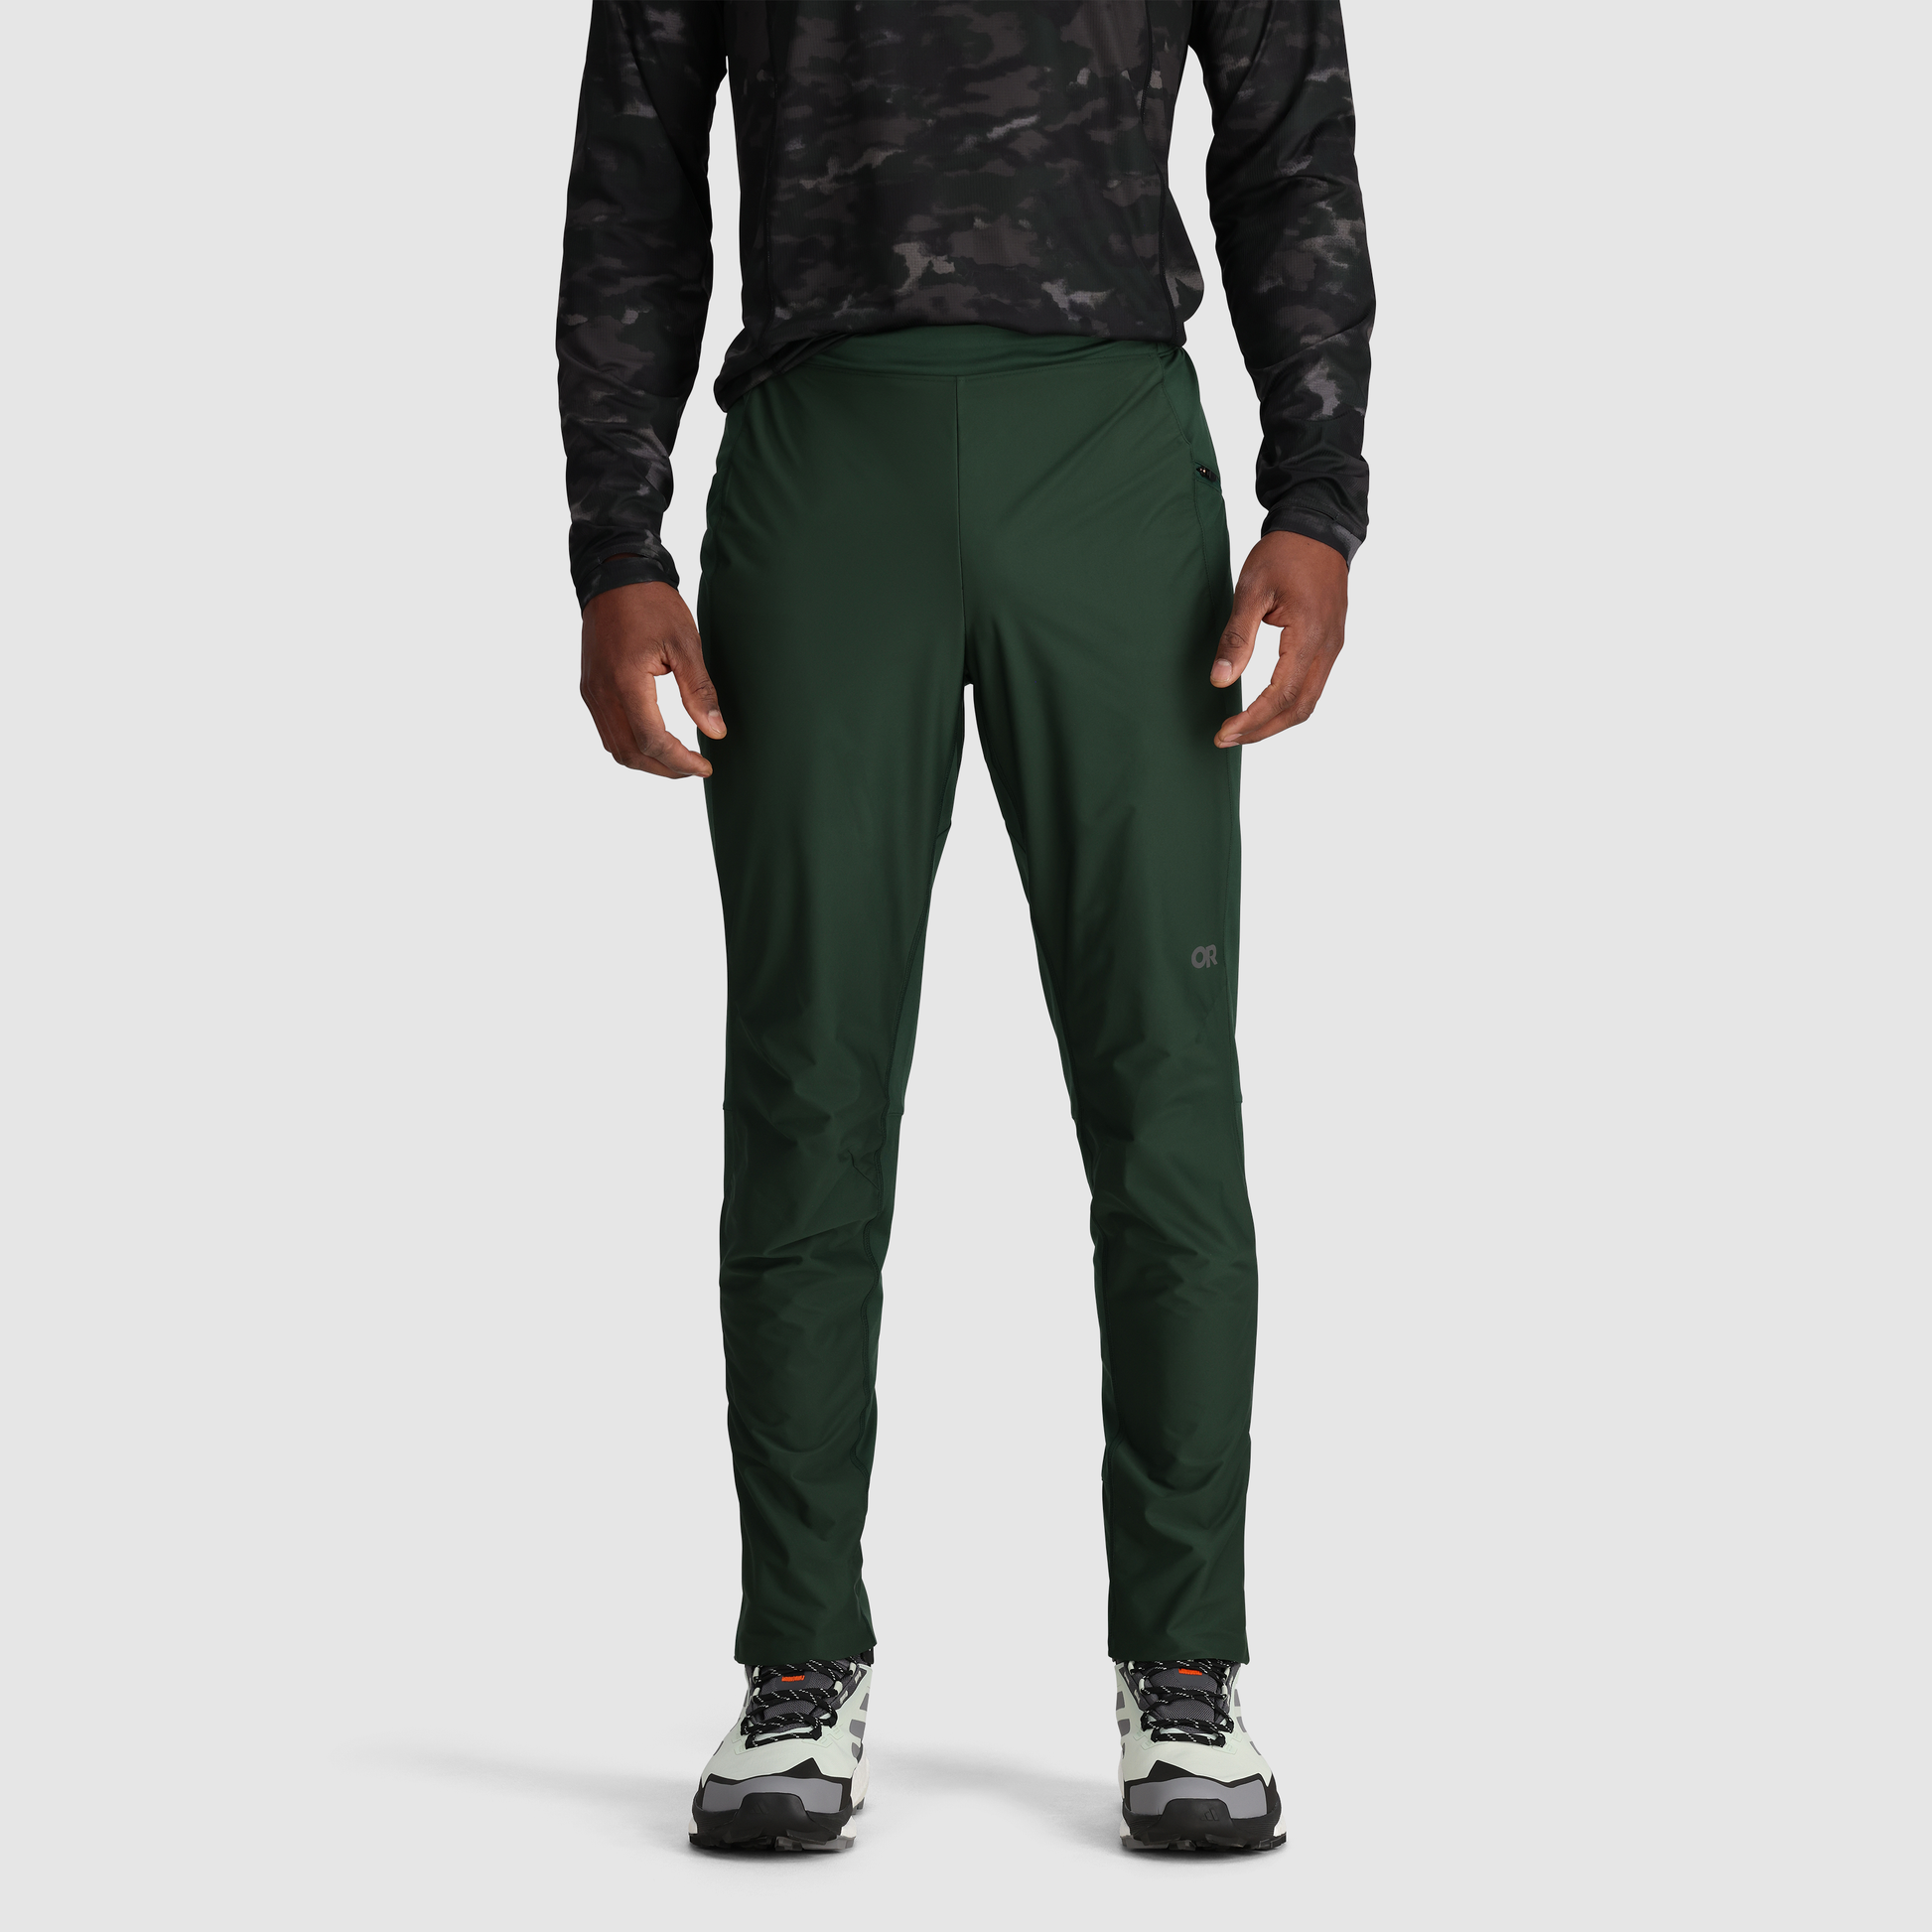 Canadian military wind pants